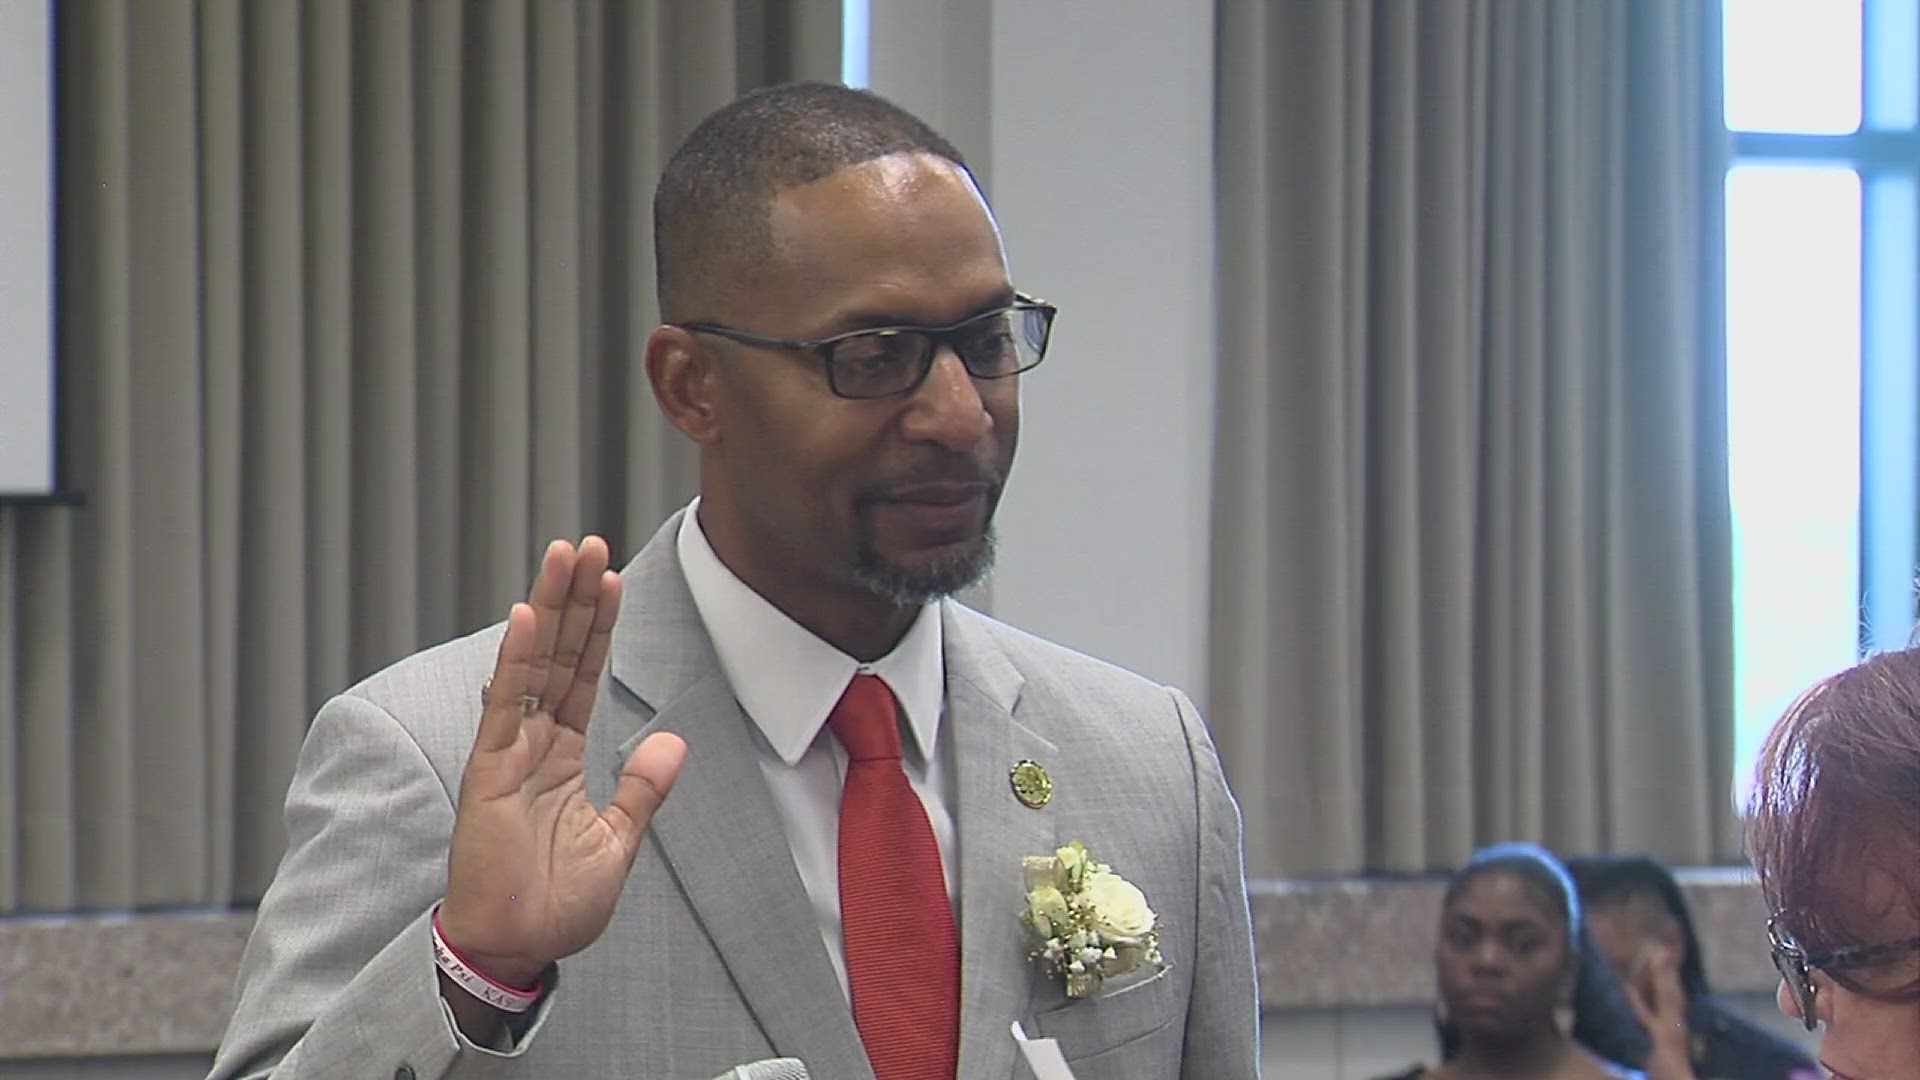 Willie Lewis Jr., Tiffany Hamilton, Thomas Kinlaw and Donald Frank were sworn in Wednesday.